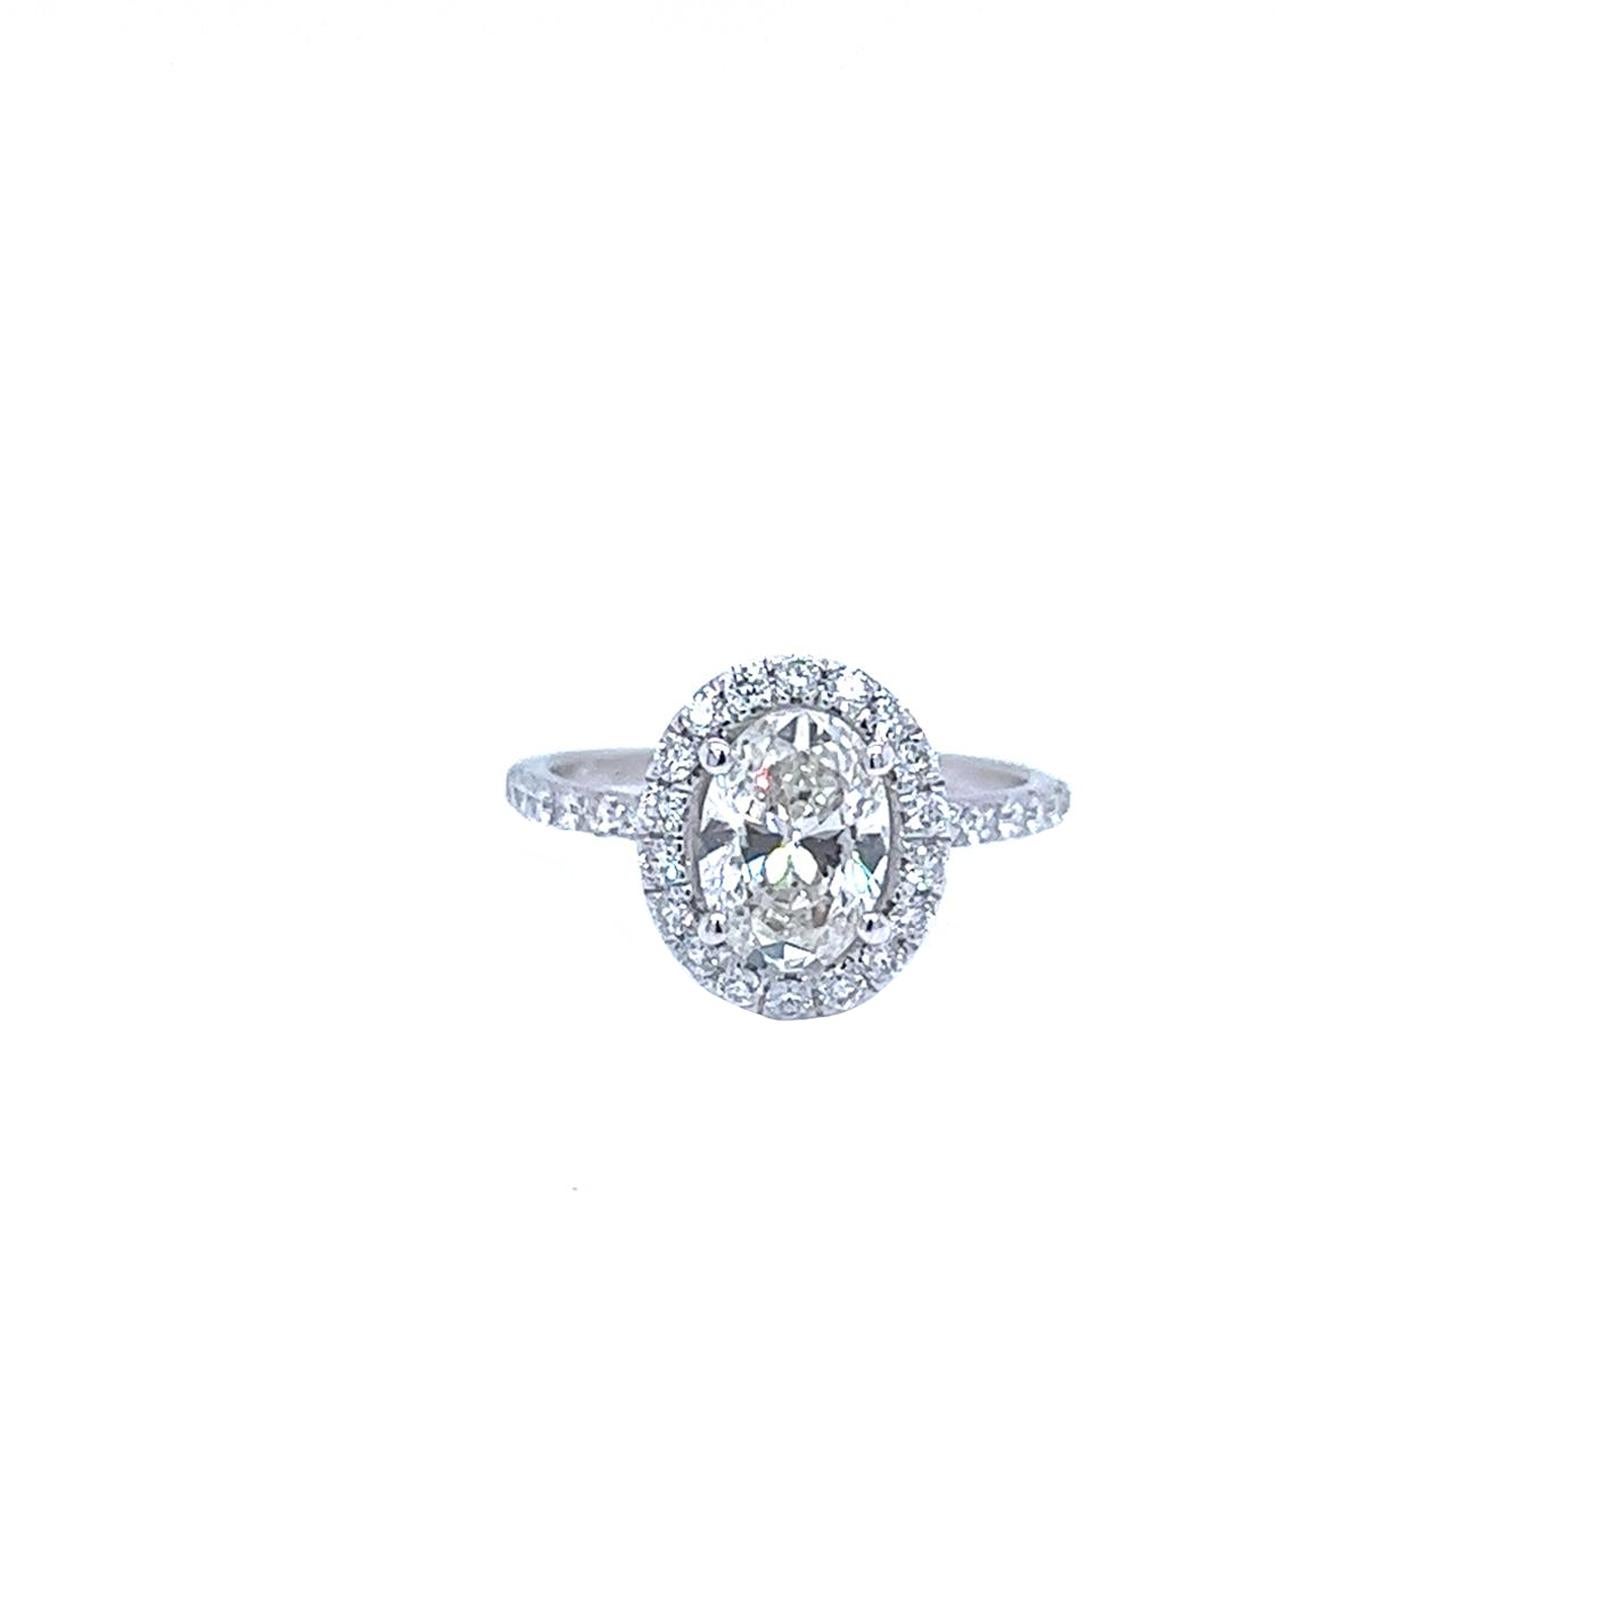 This lovely Oval Cut Natural Diamond Pave Ring Features an H color and VS2 clarity and it is surrounded by round diamonds, with a size of 6 (Sizeable), This Oval Diamond Ring sparkler would be enough to brighten anyone’s day. Crafted in 18K White